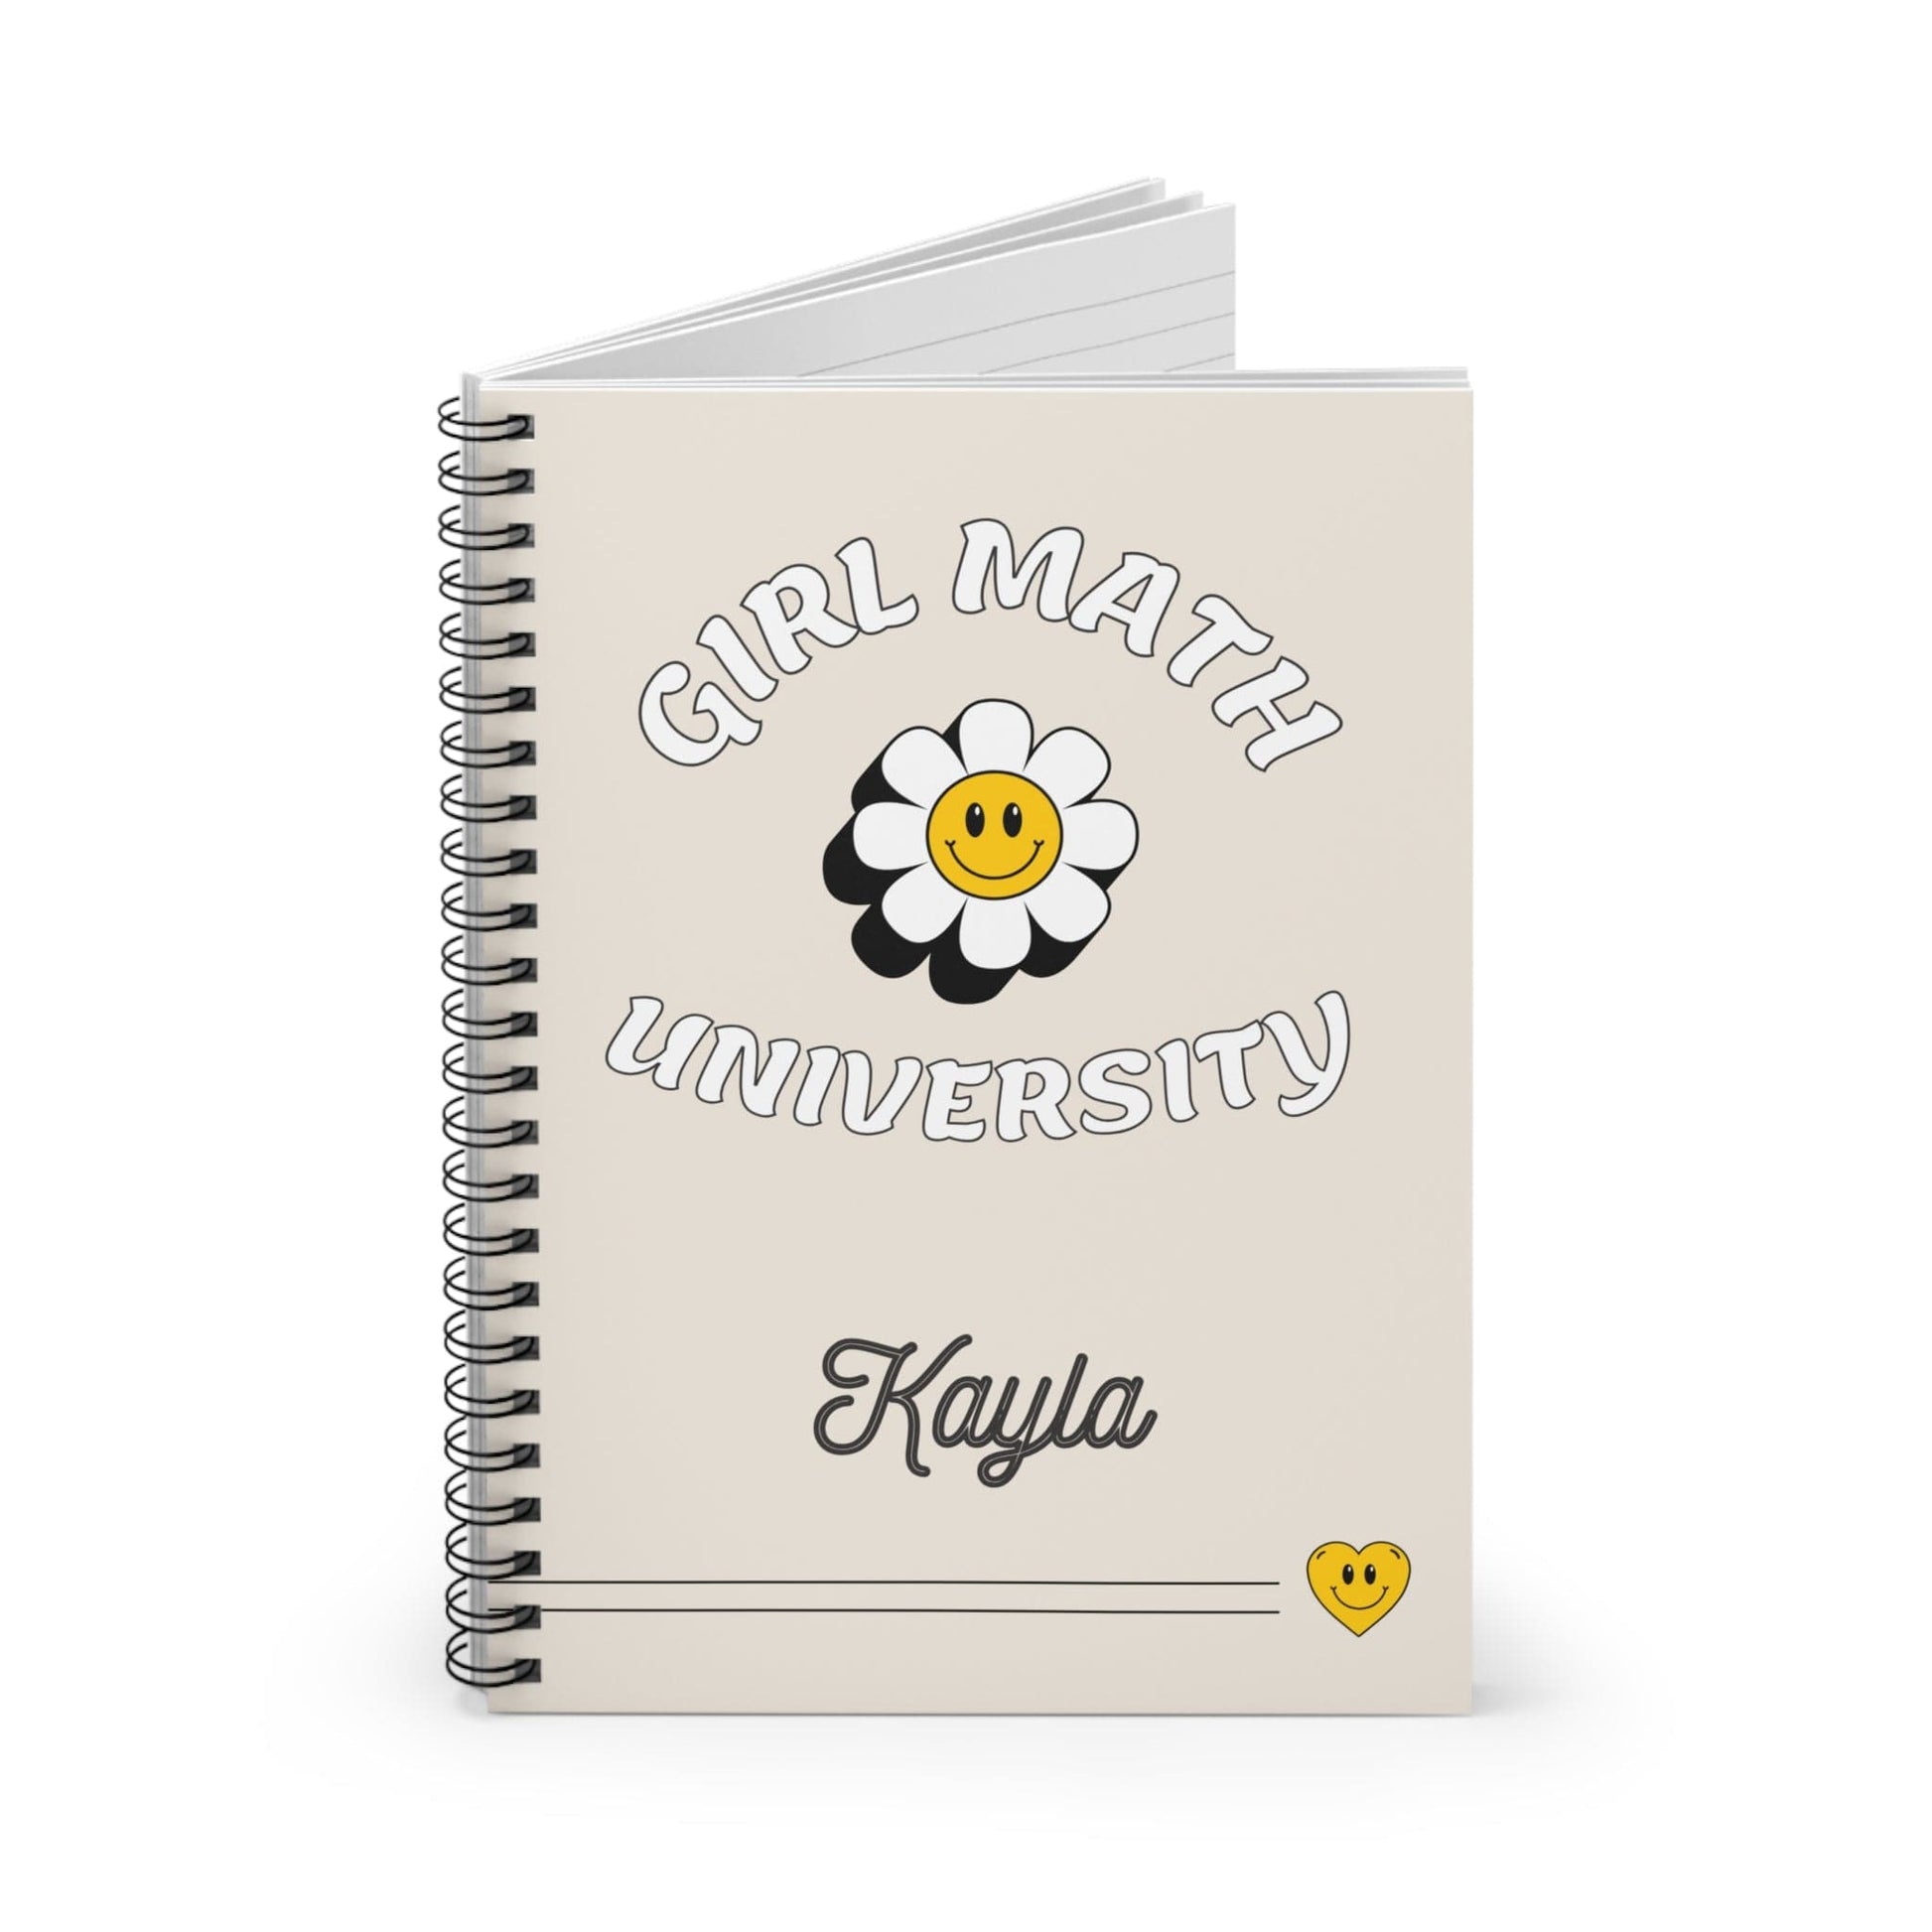 Printify Paper products One Size Custom Girl Math Spiral Notebook - Ruled Line